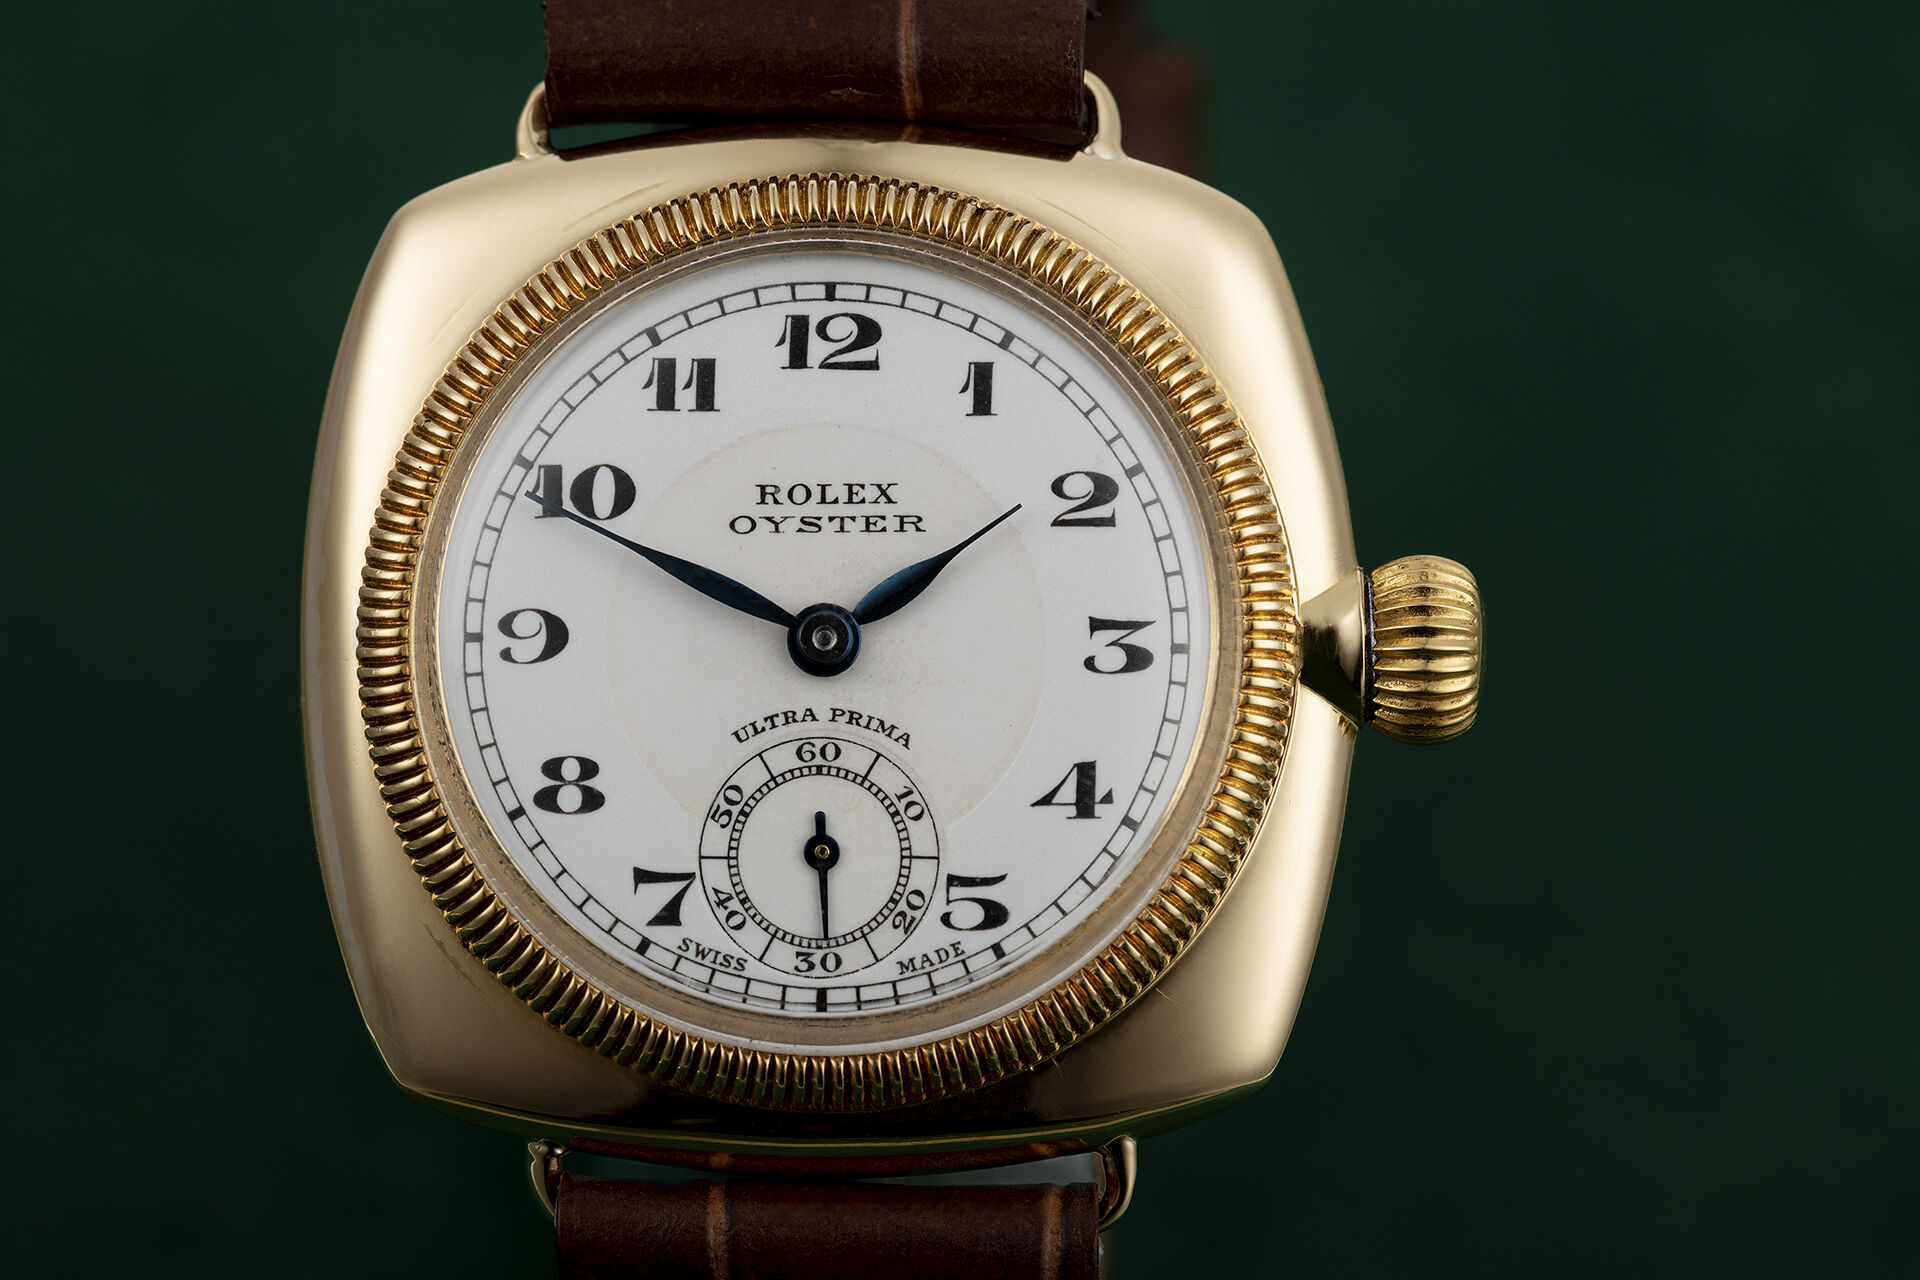  | 'The First Waterproof Watch' | Rolex Oyster Cushion